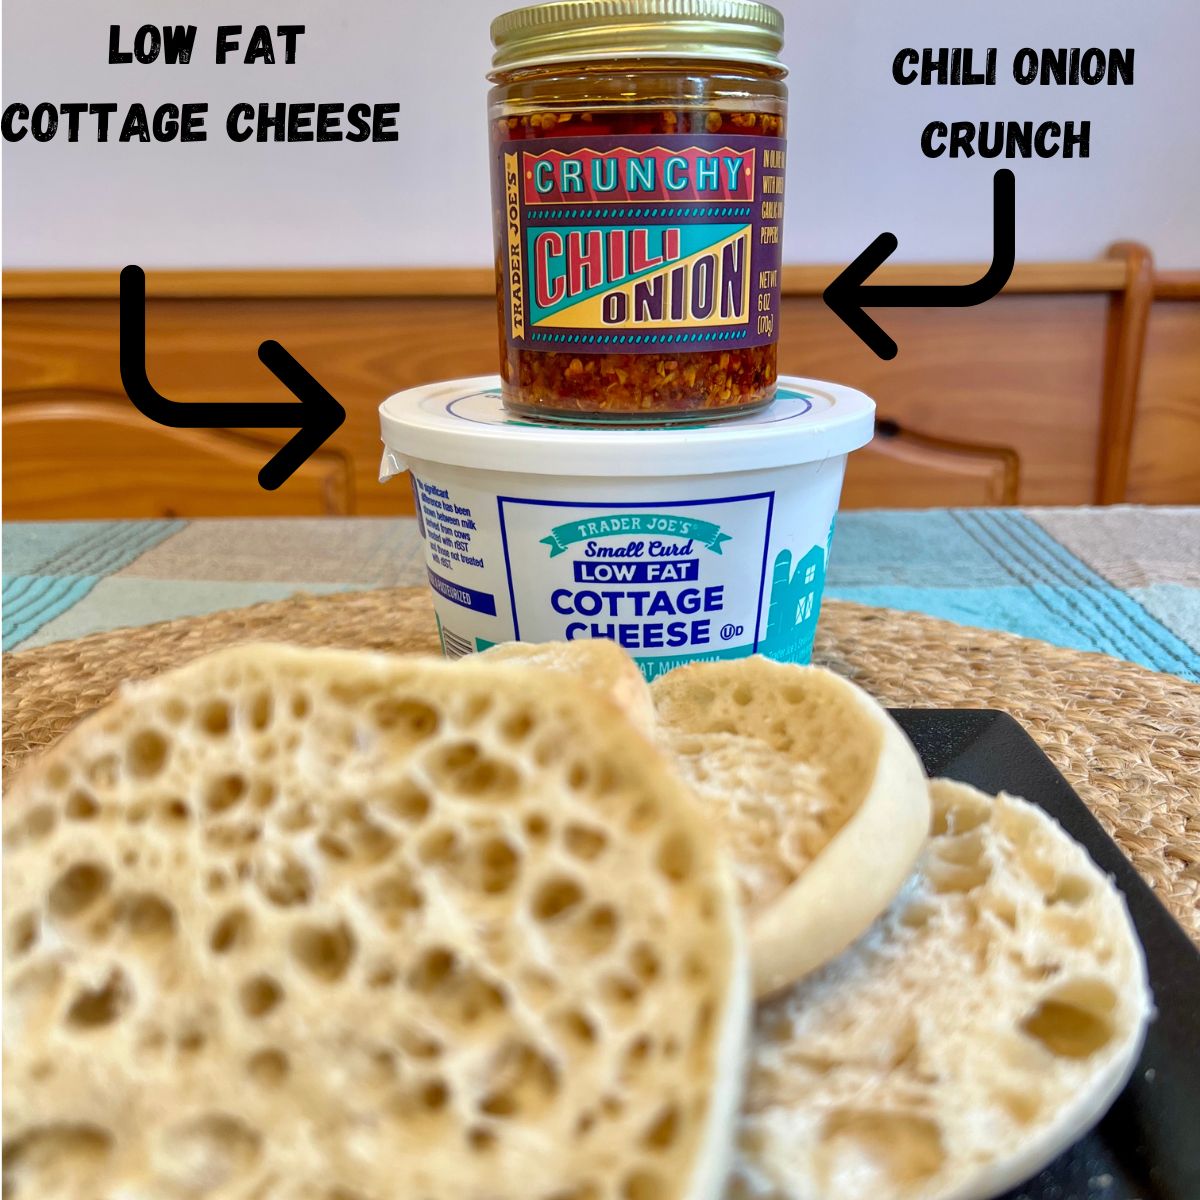 Chili Onion Crunch Muffin Ingredients English muffins low fat cottage cheese and a jar of trader joes chili onion crunch